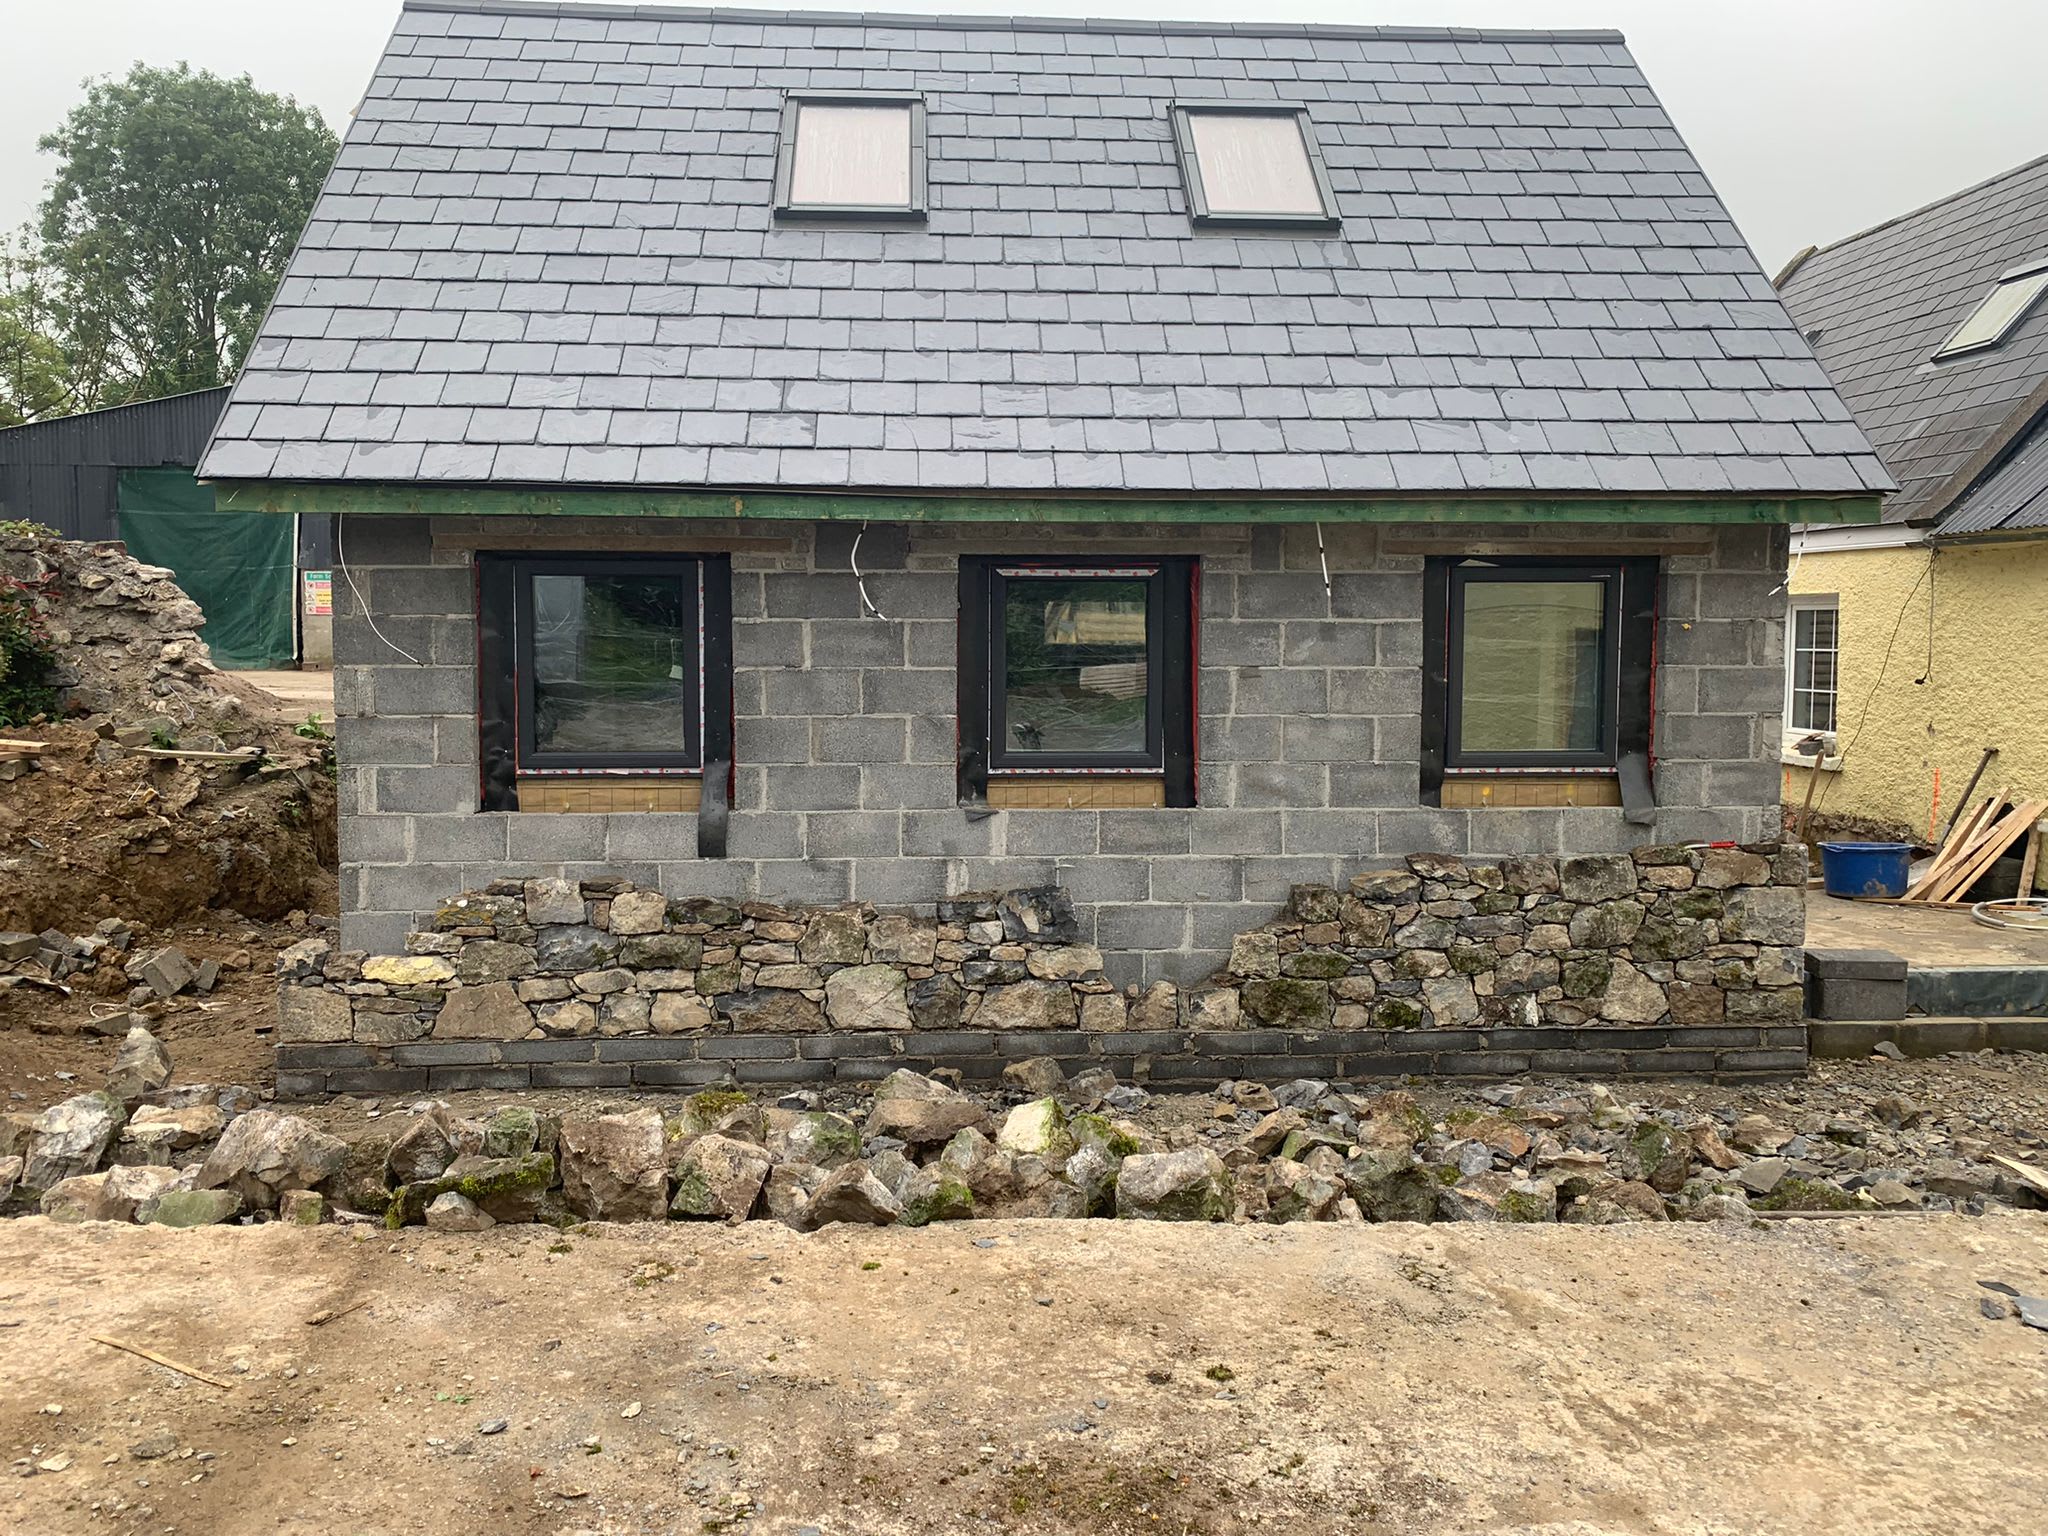 Timber Frame/Stone Clad Extensions